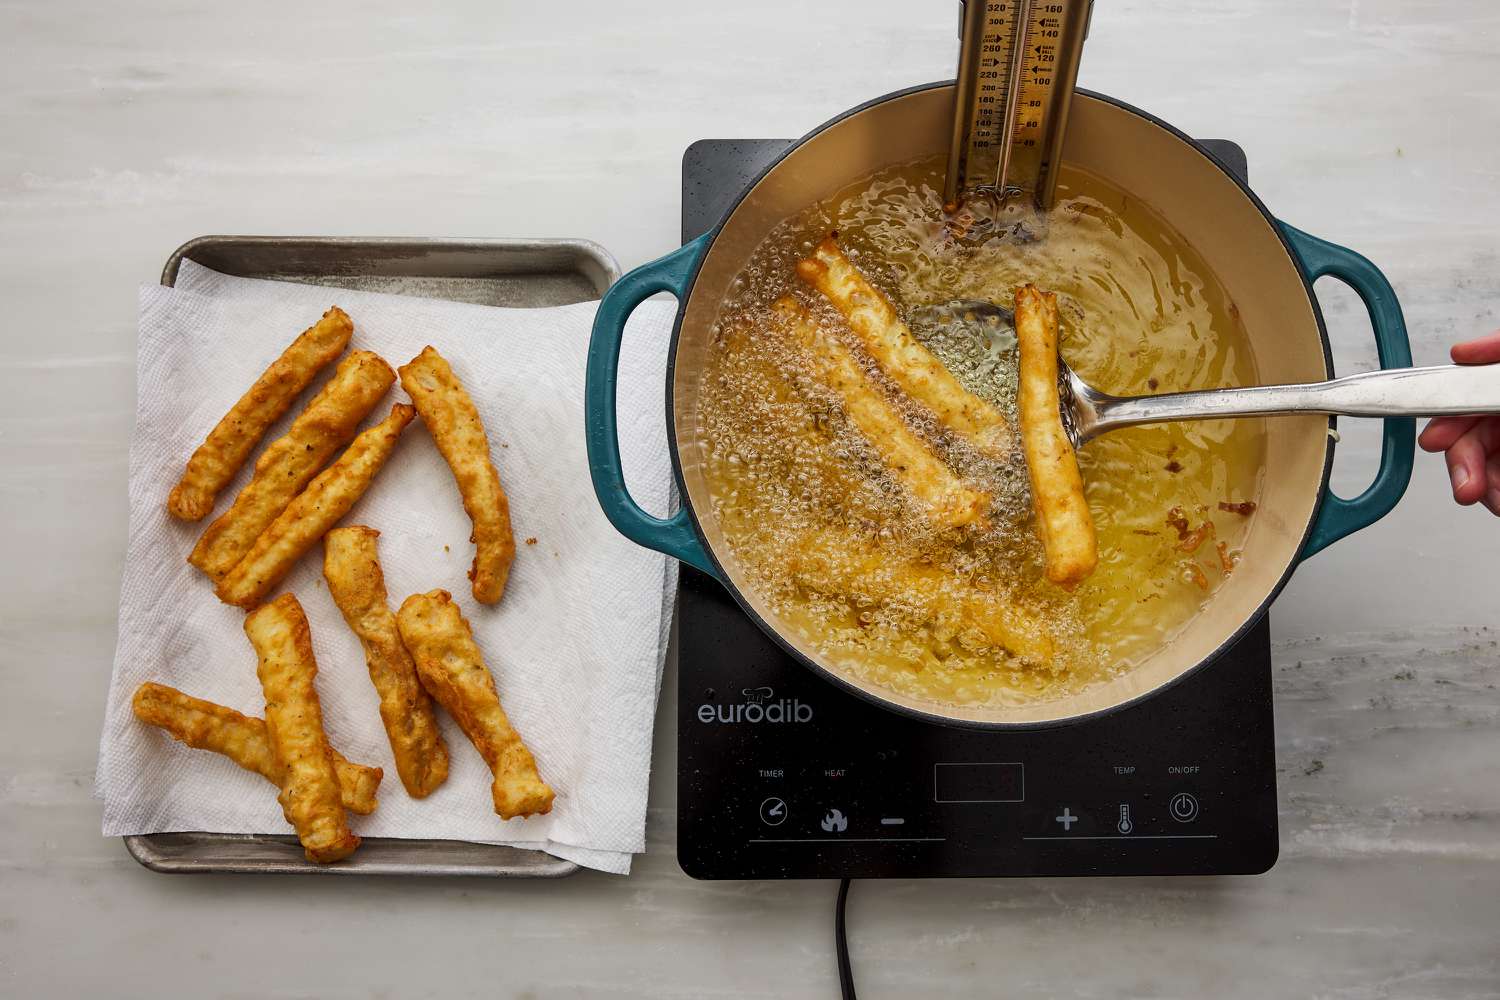 removing cod from frying oil and draining pieces of cod on paper towel